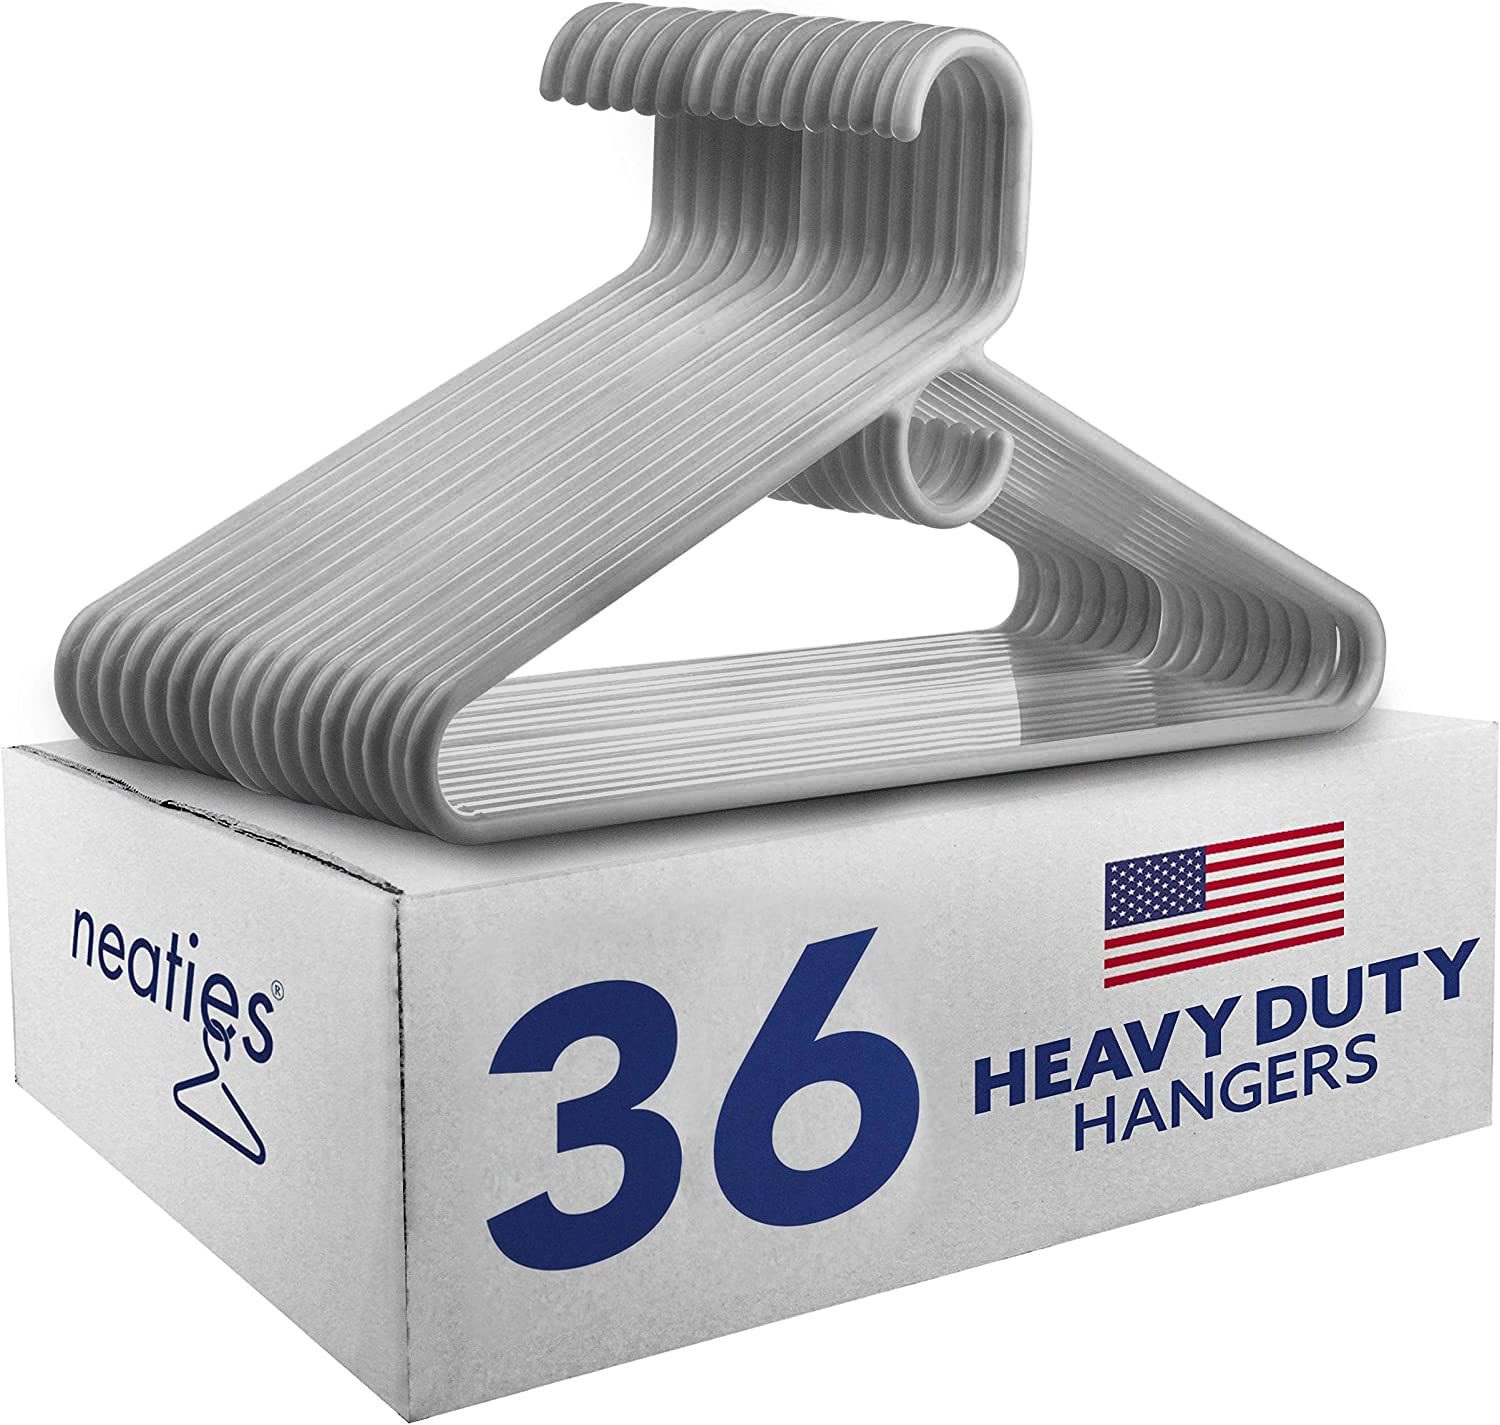 Neaties Plastic Hangers Bulk Made in USA (15 to 200 Pack Available